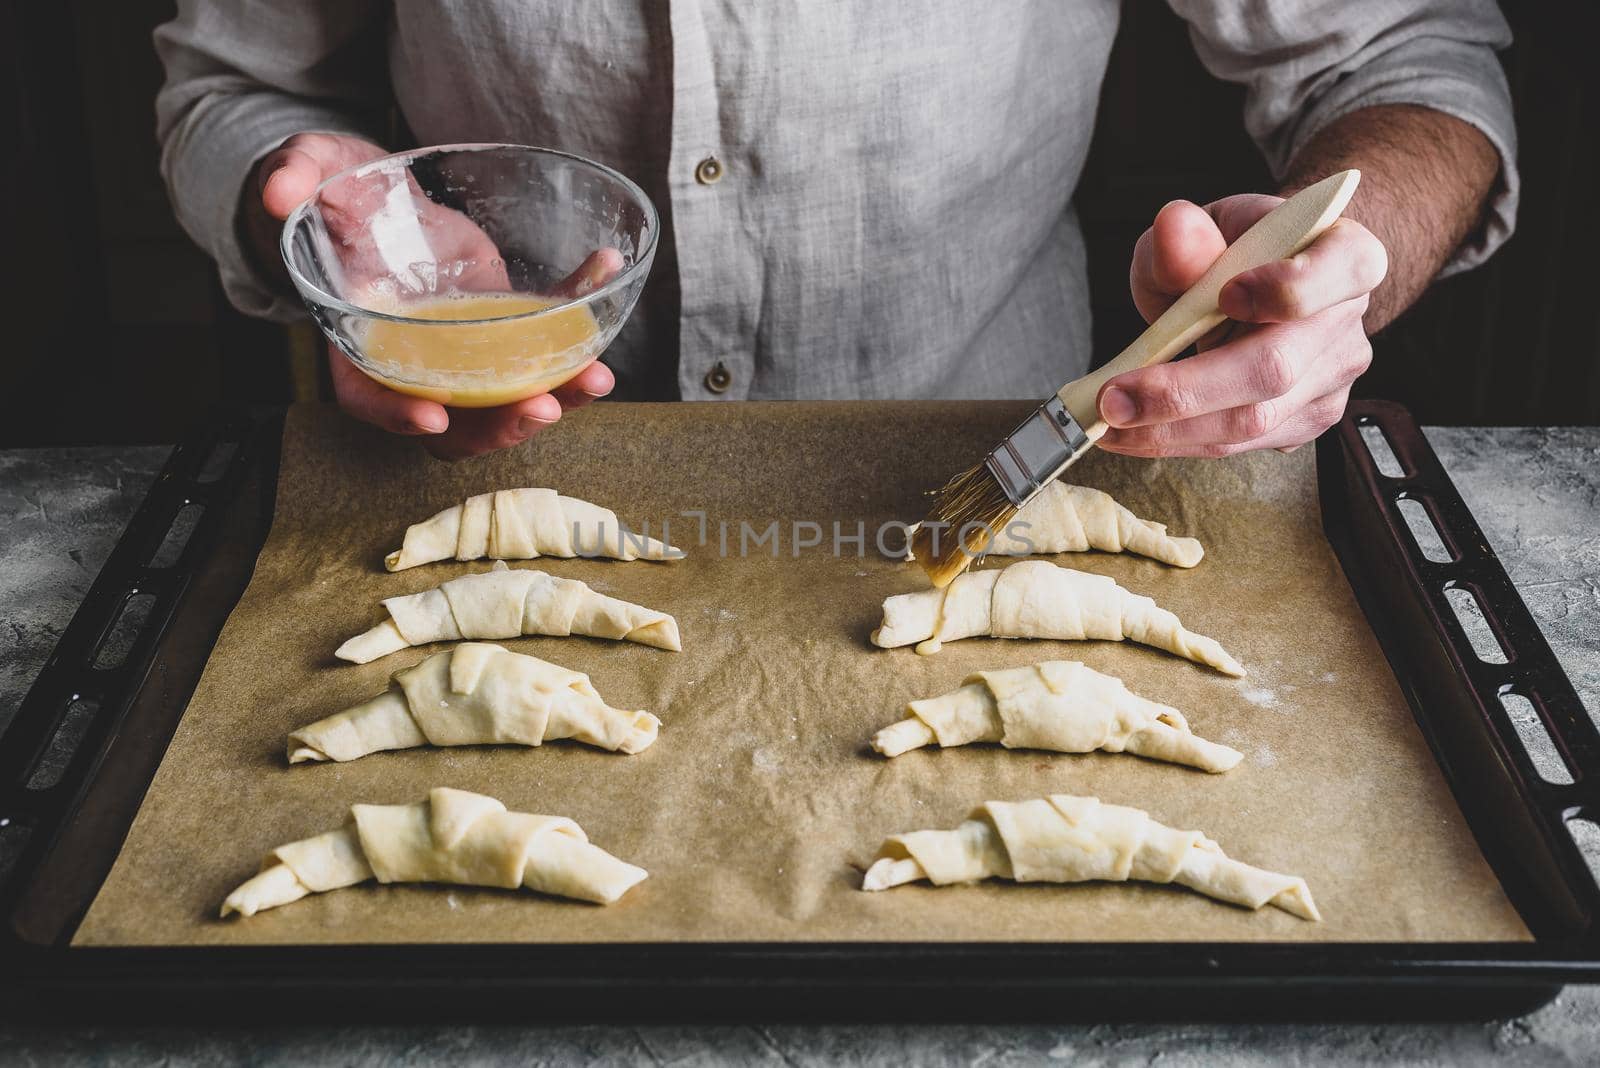 Baking sheet of raw croissants stuffed with chocolate spread by Seva_blsv